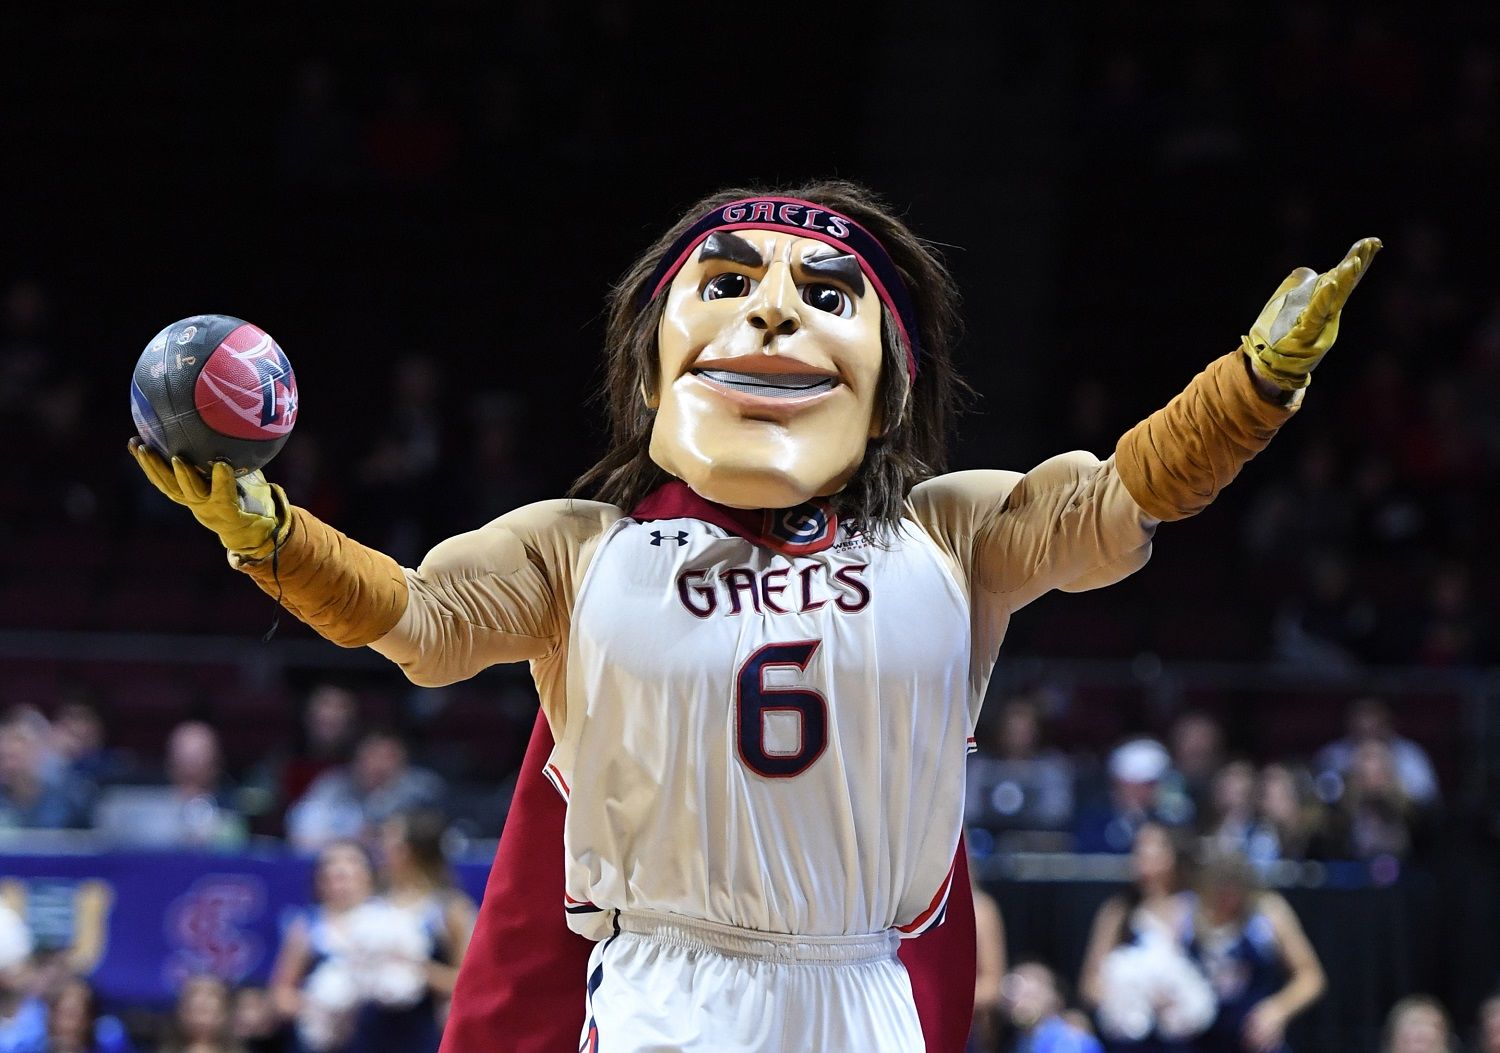 LAS VEGAS, NEVADA - MARCH 11:  The Saint Mary's Gaels mascot prepares to throw a ball to fans during a semifinal game of the West Coast Conference basketball tournament against the San Diego Toreros at the Orleans Arena on March 11, 2019 in Las Vegas, Nevada. The Gaels defeated the Toreros 69-62.  (Photo by Ethan Miller/Getty Images)